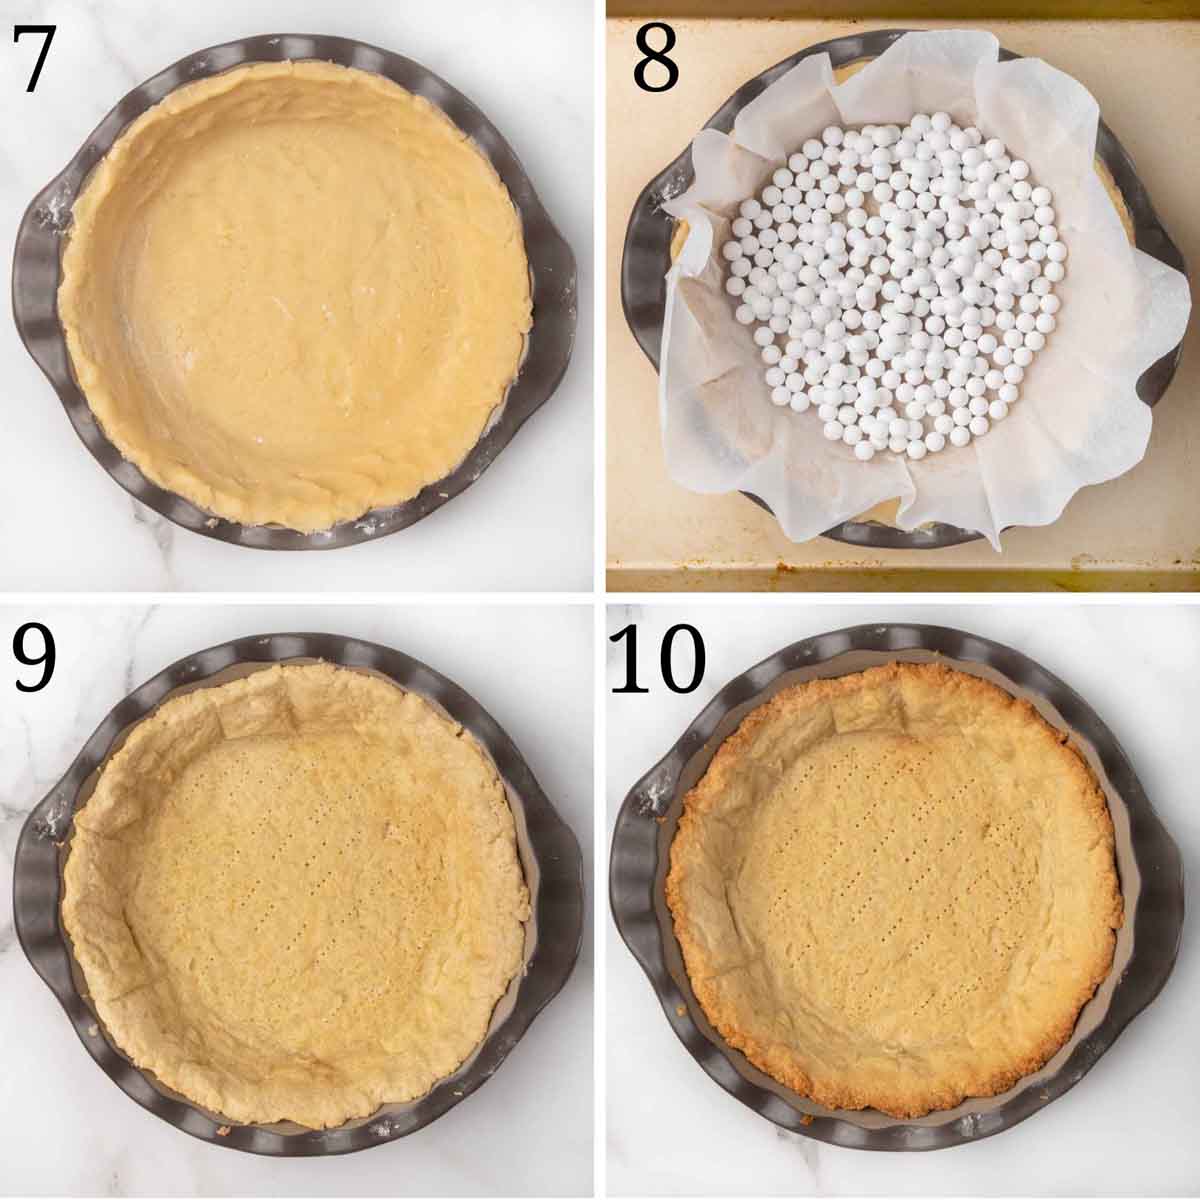 6 images showing how to form and bake a pie crust.